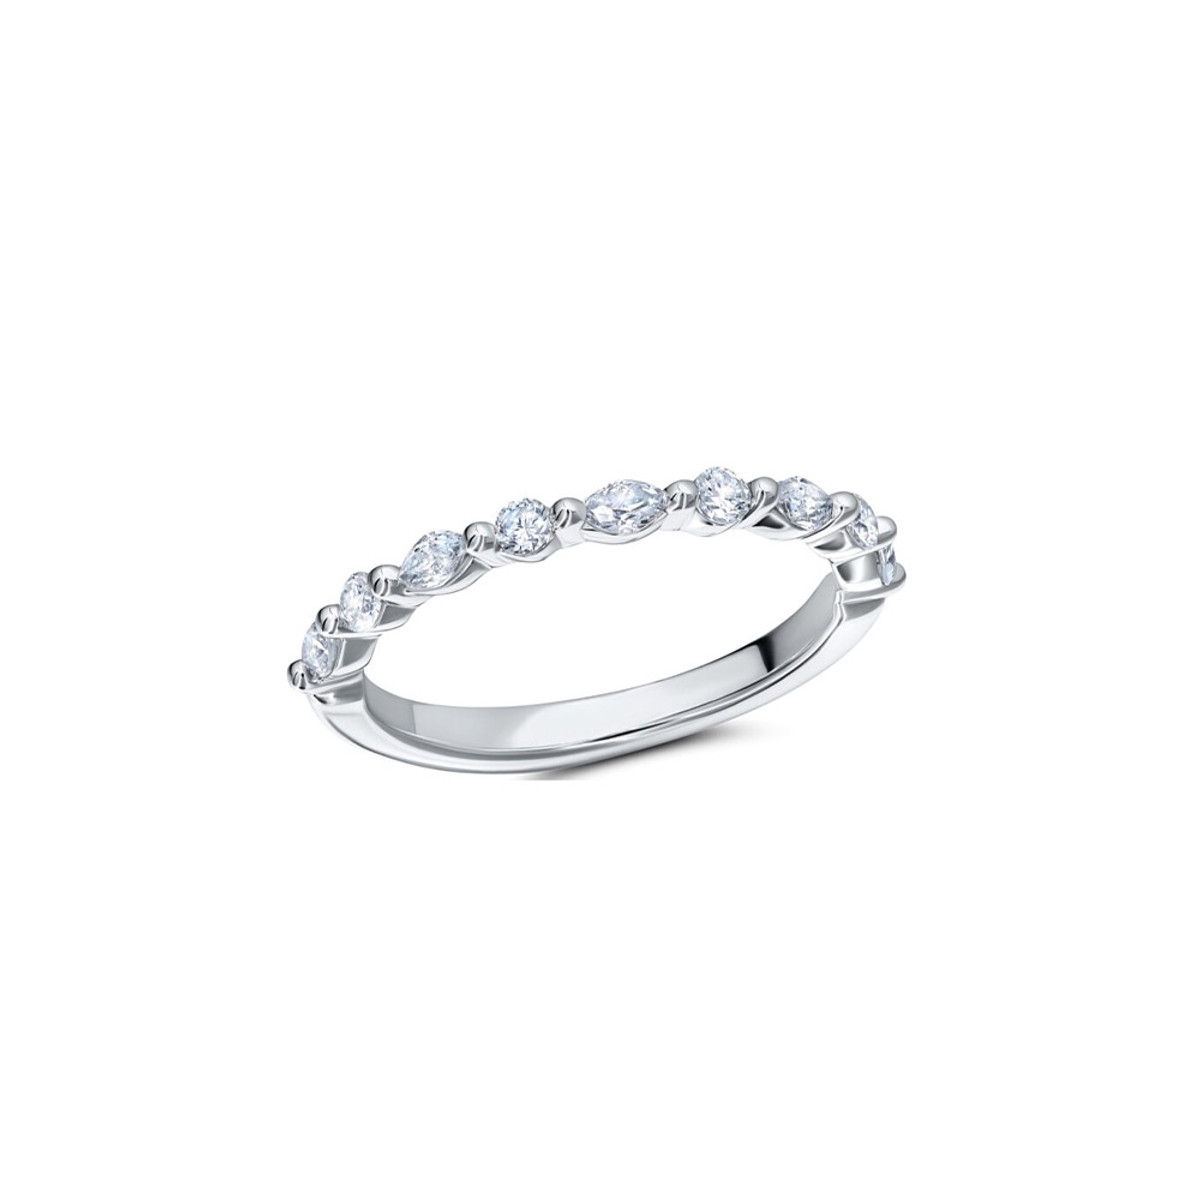 Peter Storm 14K White Gold Marquise and Round Diamond Band-39058 Product Image